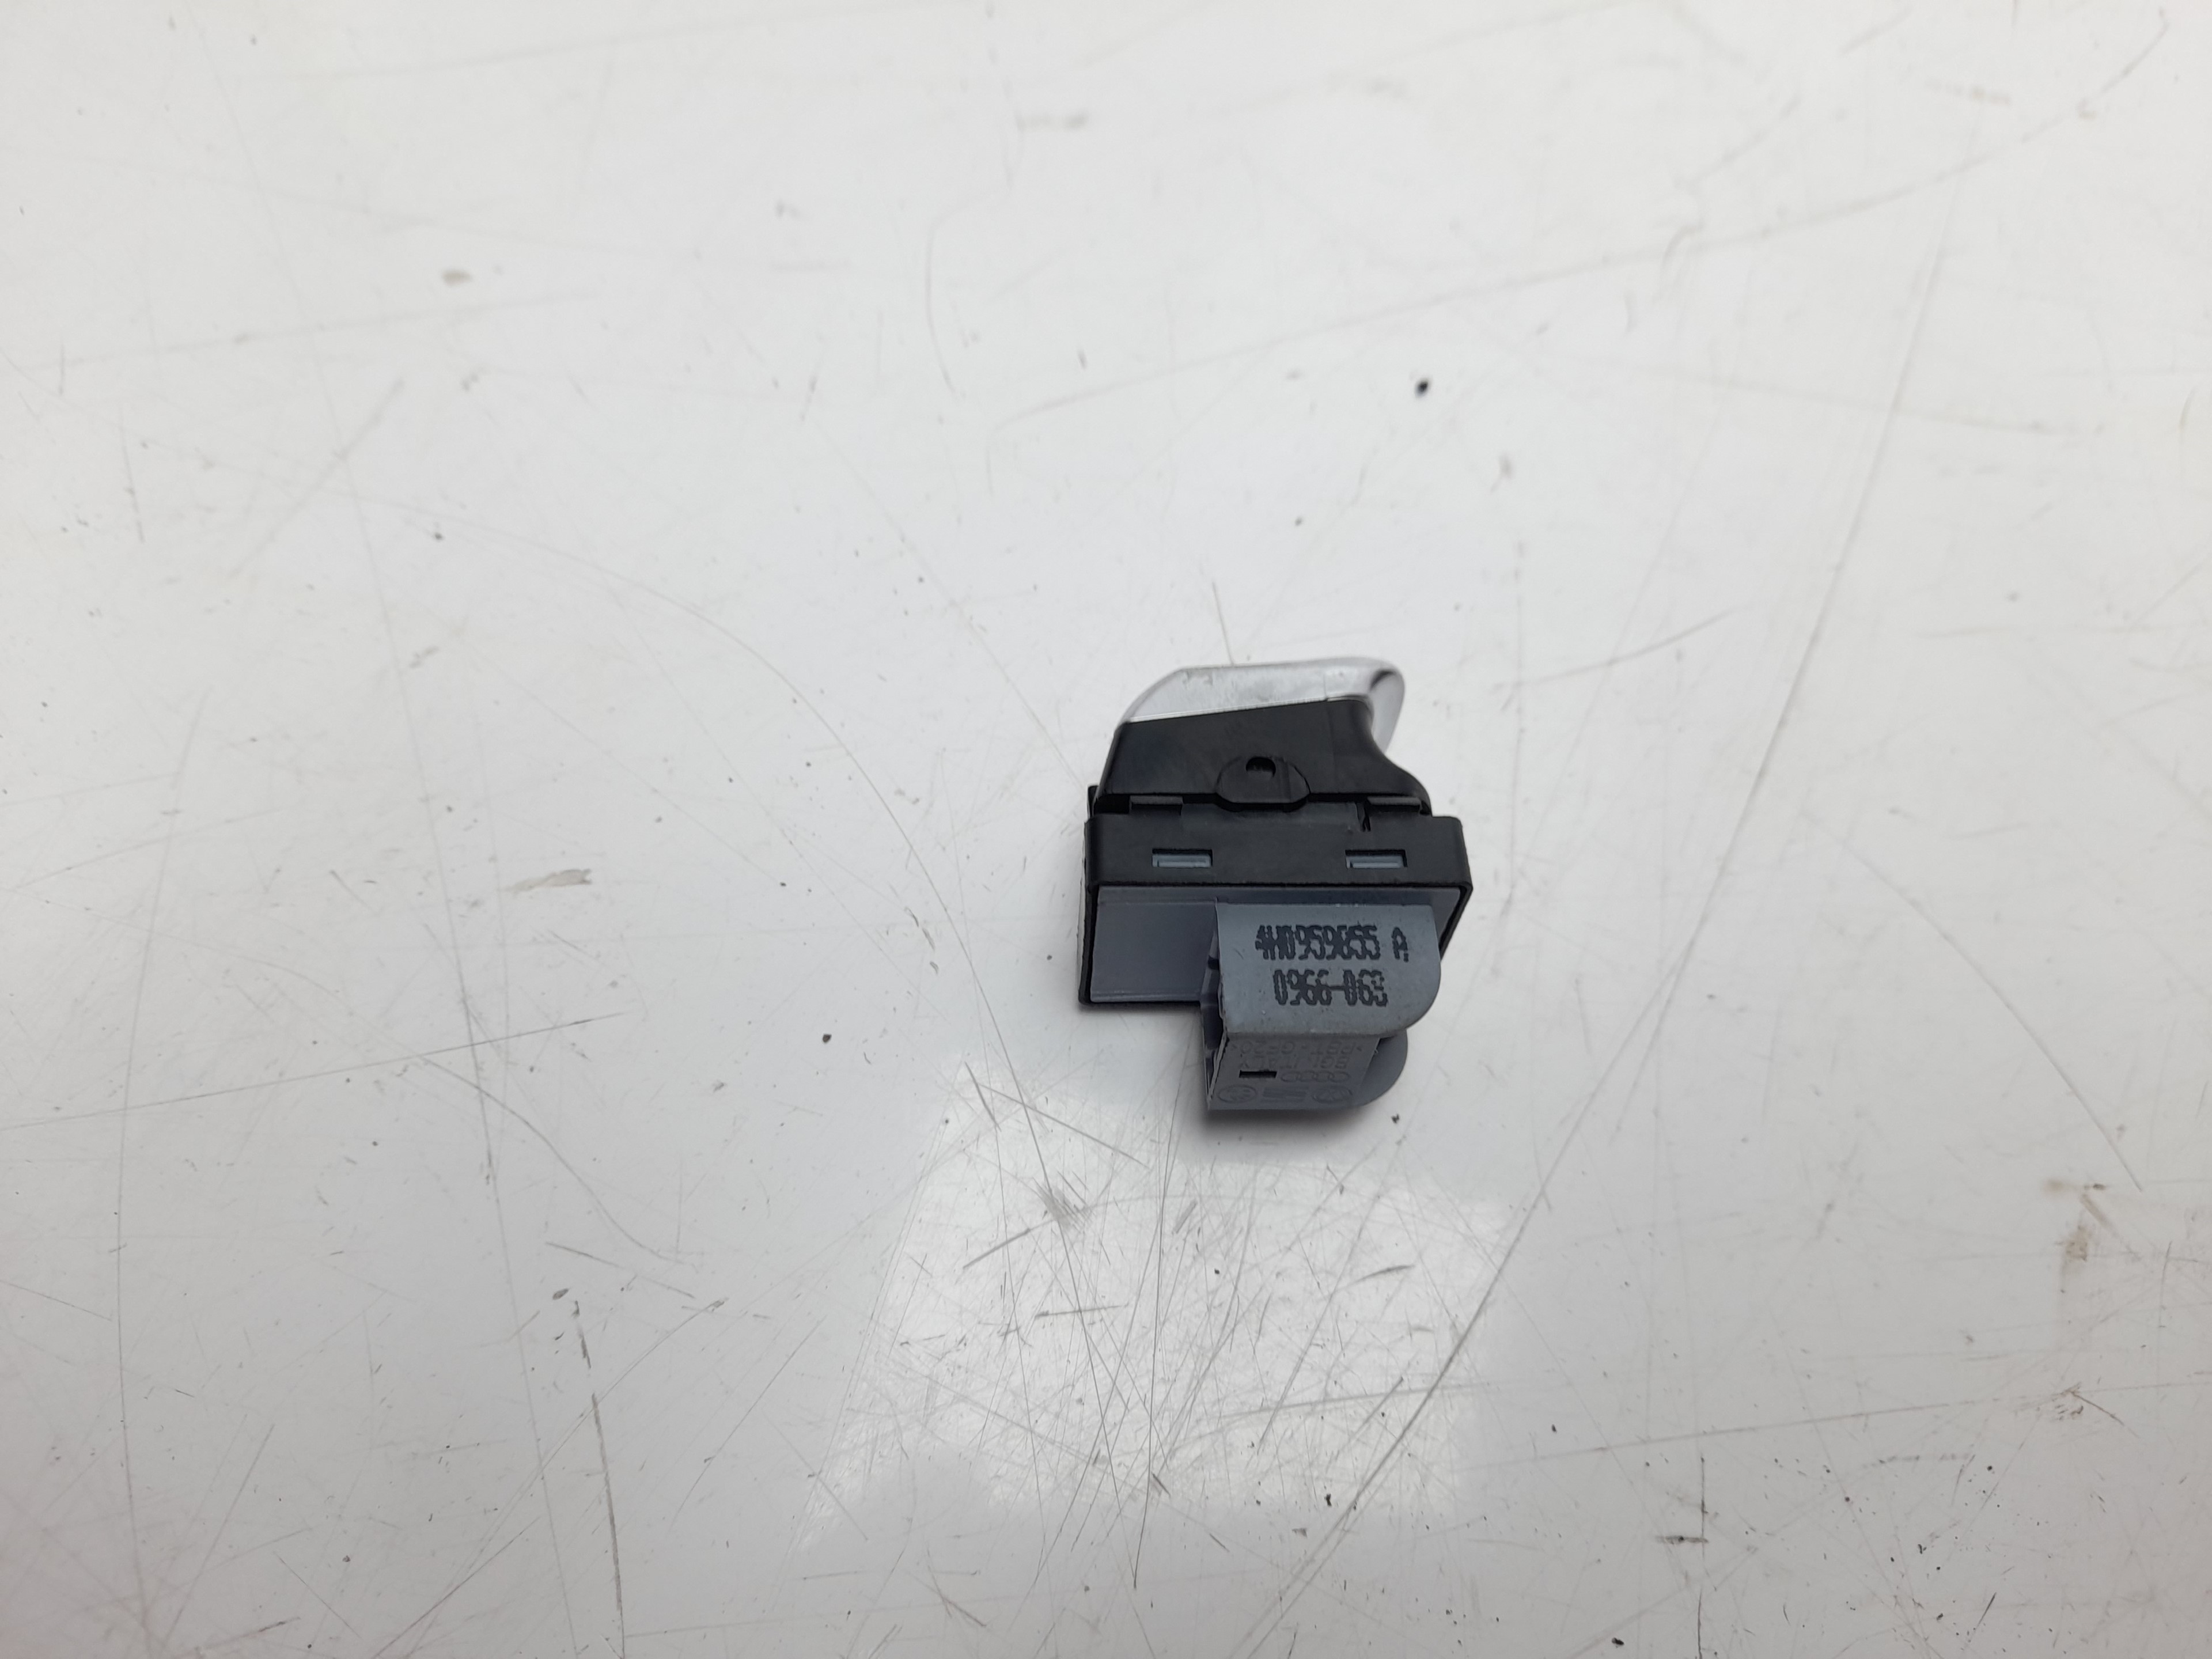 AUDI A7 C7/4G (2010-2020) Rear Right Door Window Control Switch 4H0959855A 18699402